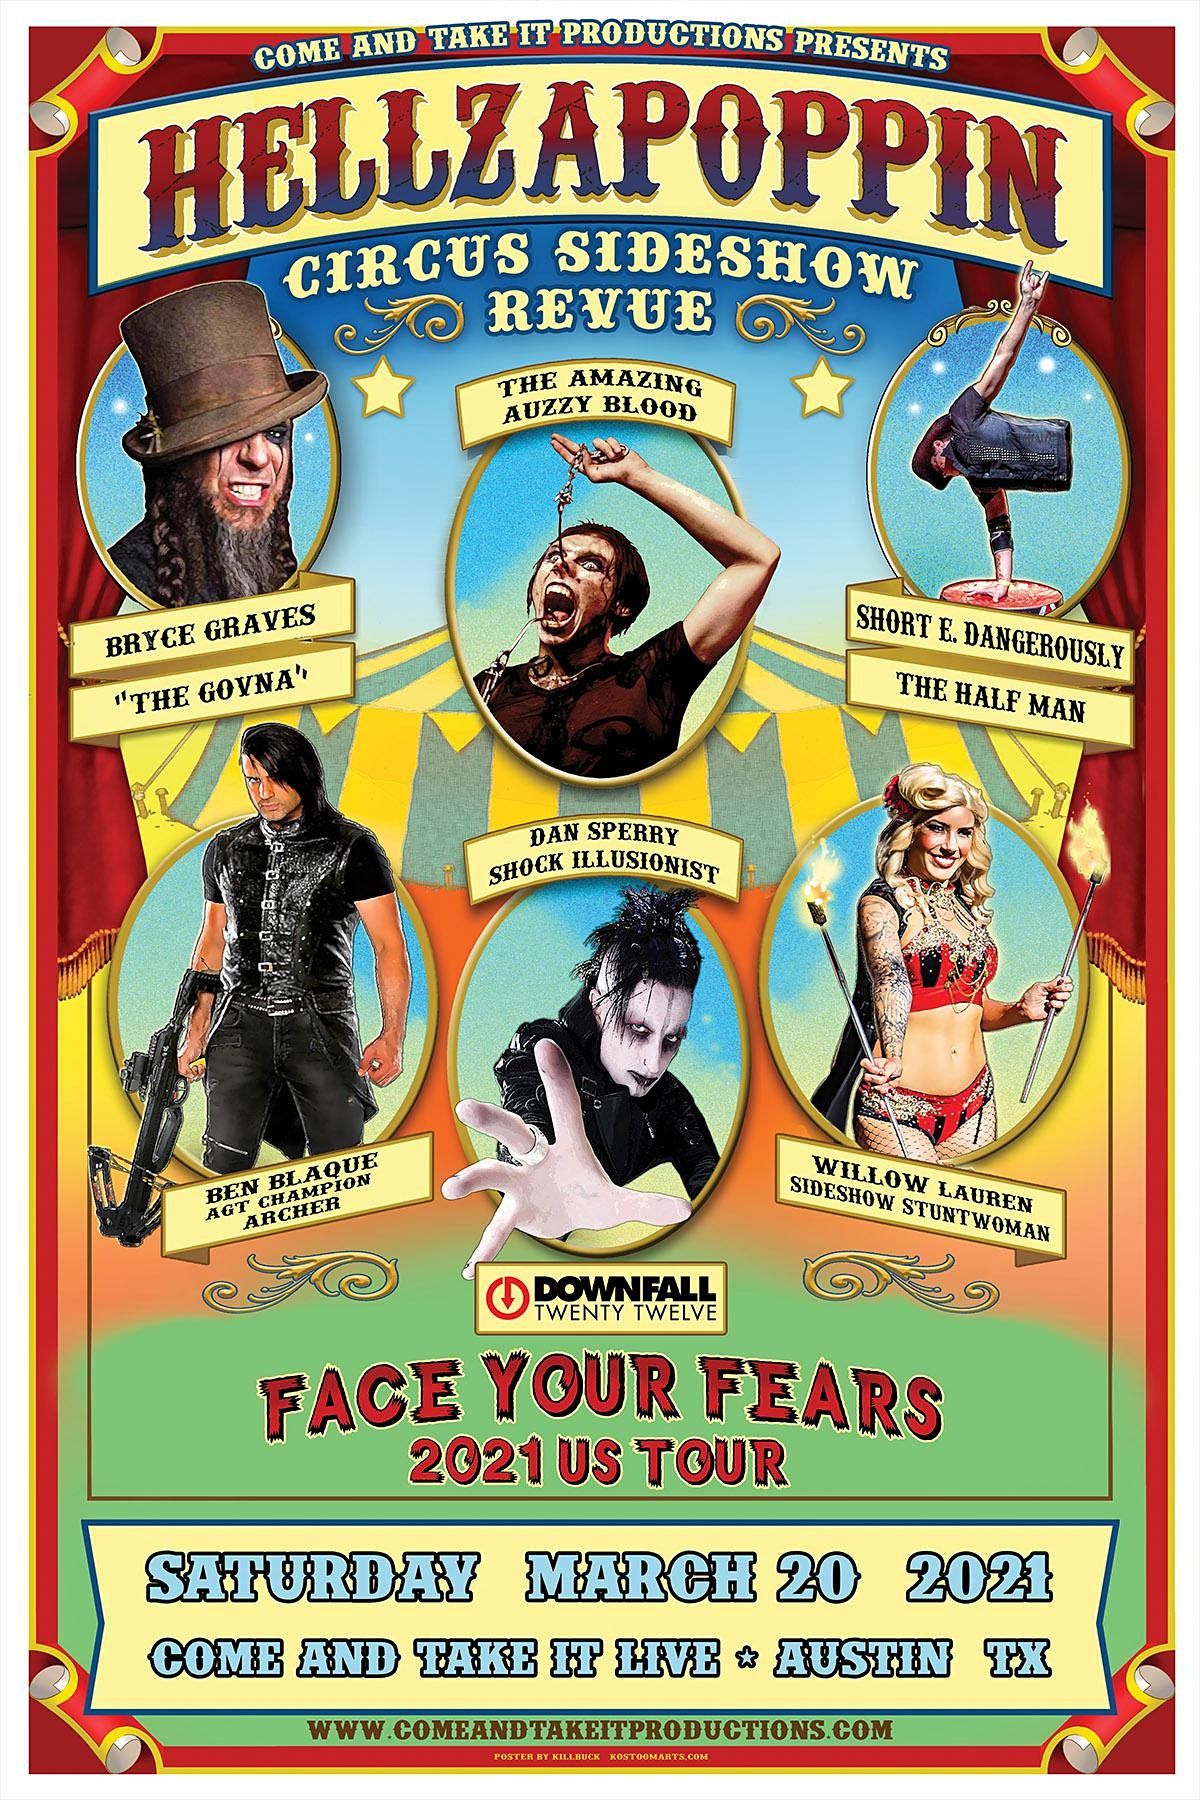 HELLZAPOPPIN CIRCUS SIDESHOW REVIEW